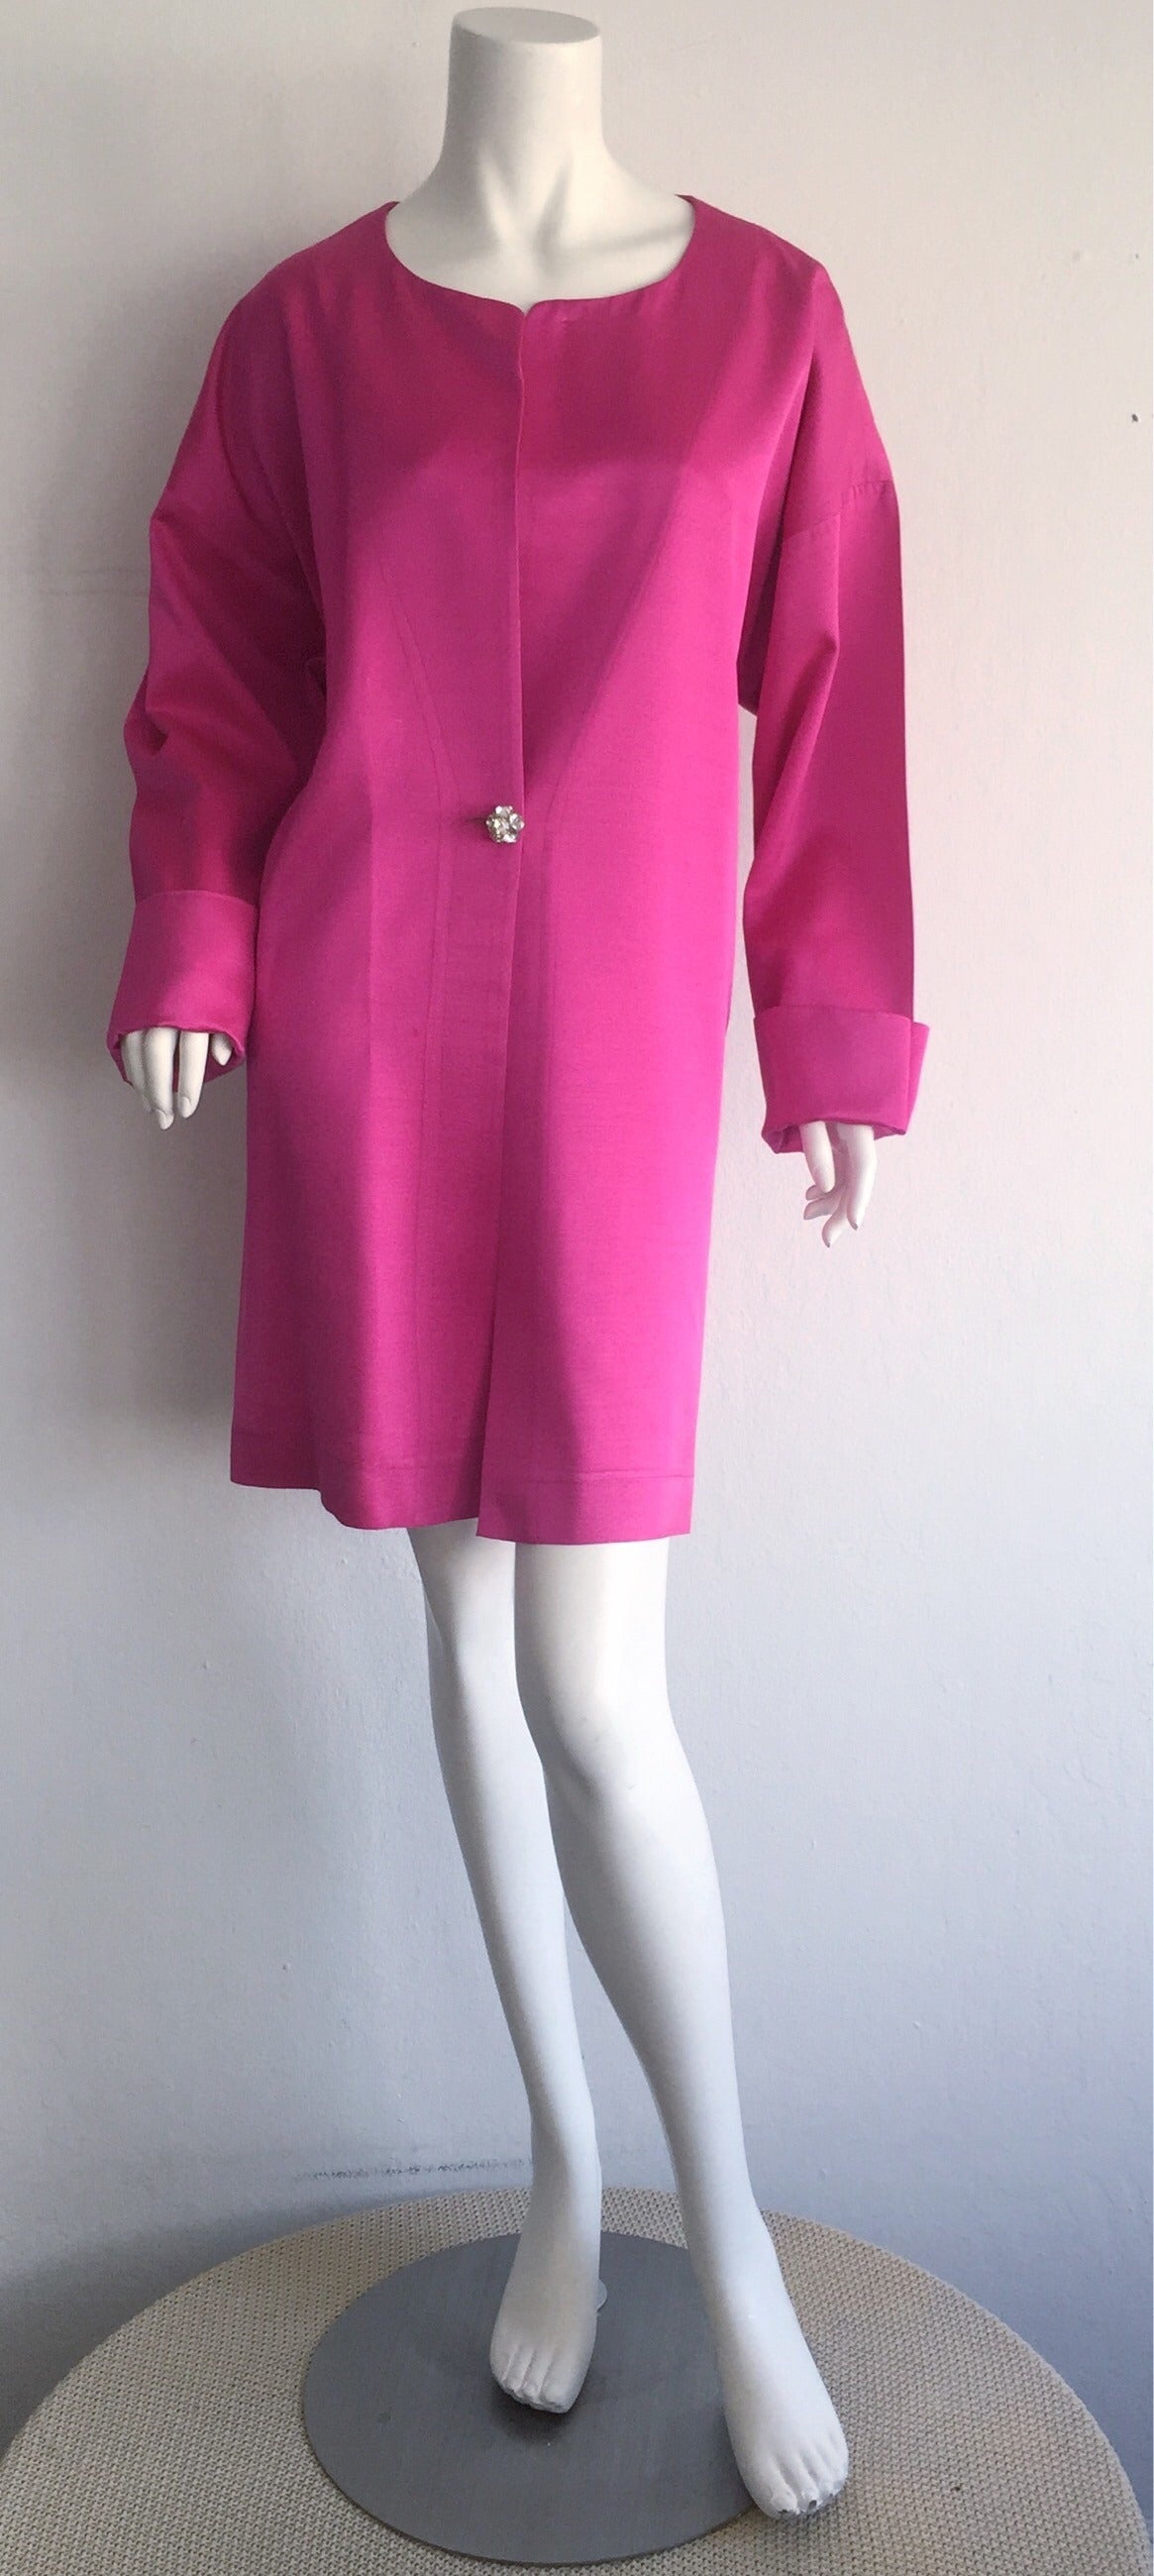 Insanely gorgeous vintage 1960s Jean Muir opera/swing jacket! Vibrant hue of pink/fuchsia. Features a single button closure of clustered rhinestones. In great condition. Will fit Size S-XL 

Measurements:
Up to 48 inch bust
Up to 44 inch waist